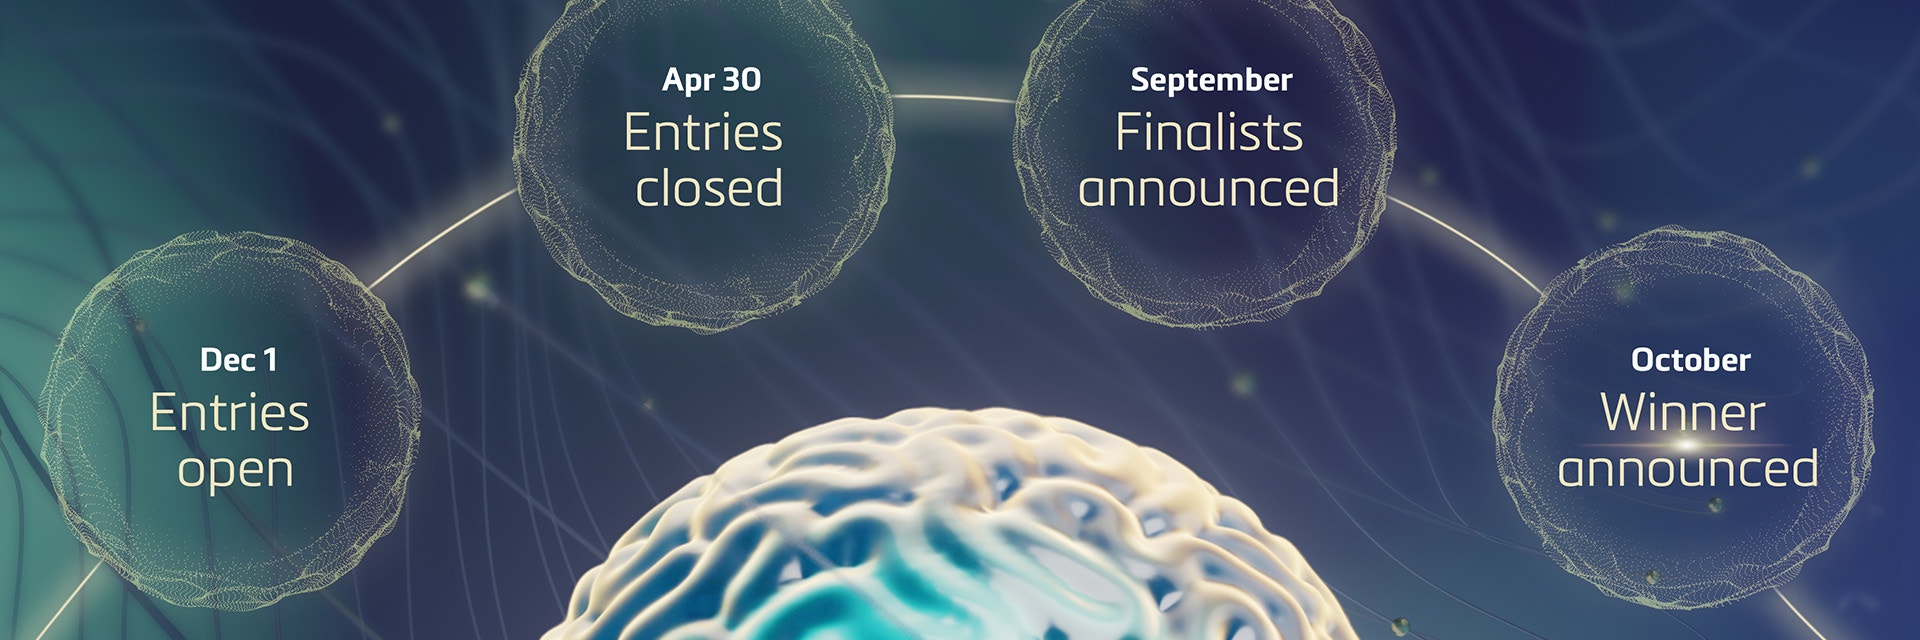 Timeline of the Mimics Innovation Awards: Dec 1, entries open; Apr 30, entries close; September, finalists announced; October, winner announced